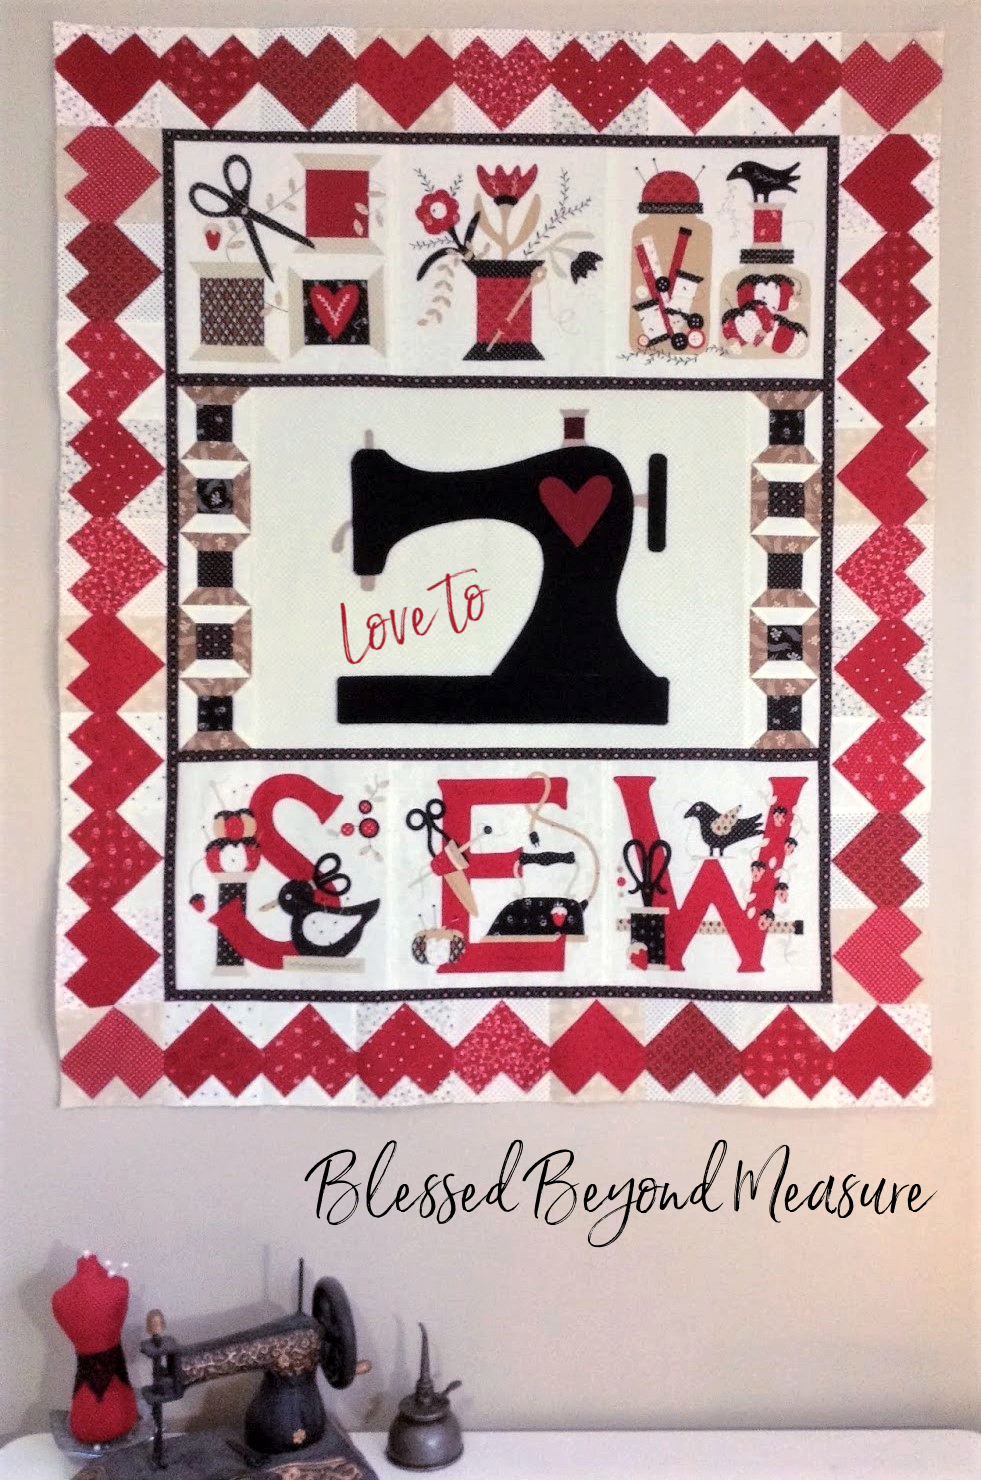 My Favorite Sewing Notions, Supplies & Accessories - Melly Sews